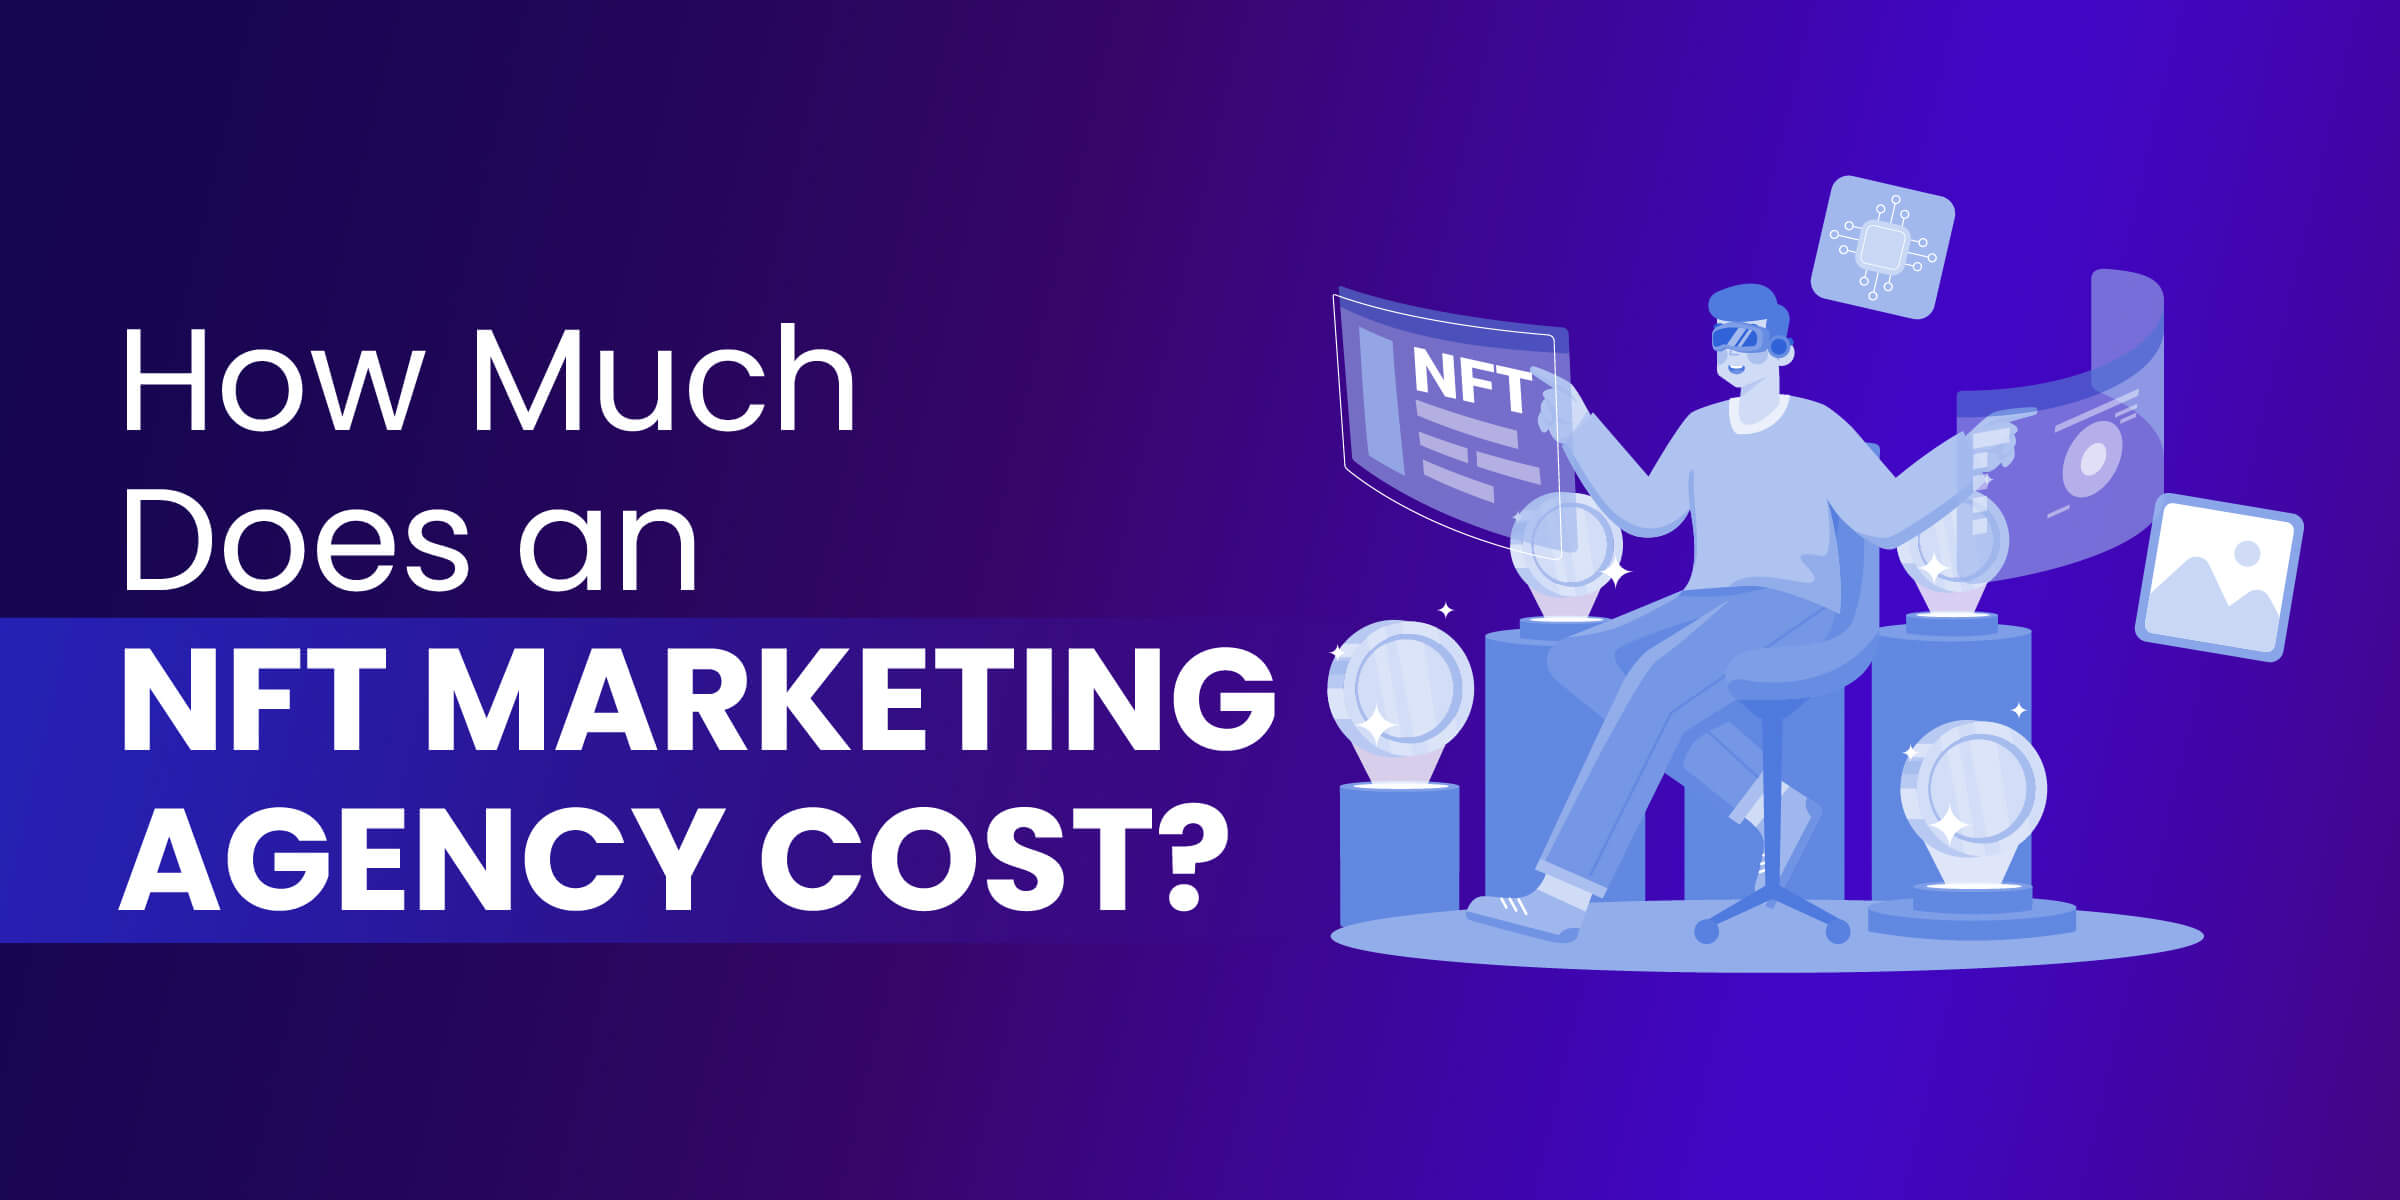 How Much Does NFT Agency Cost